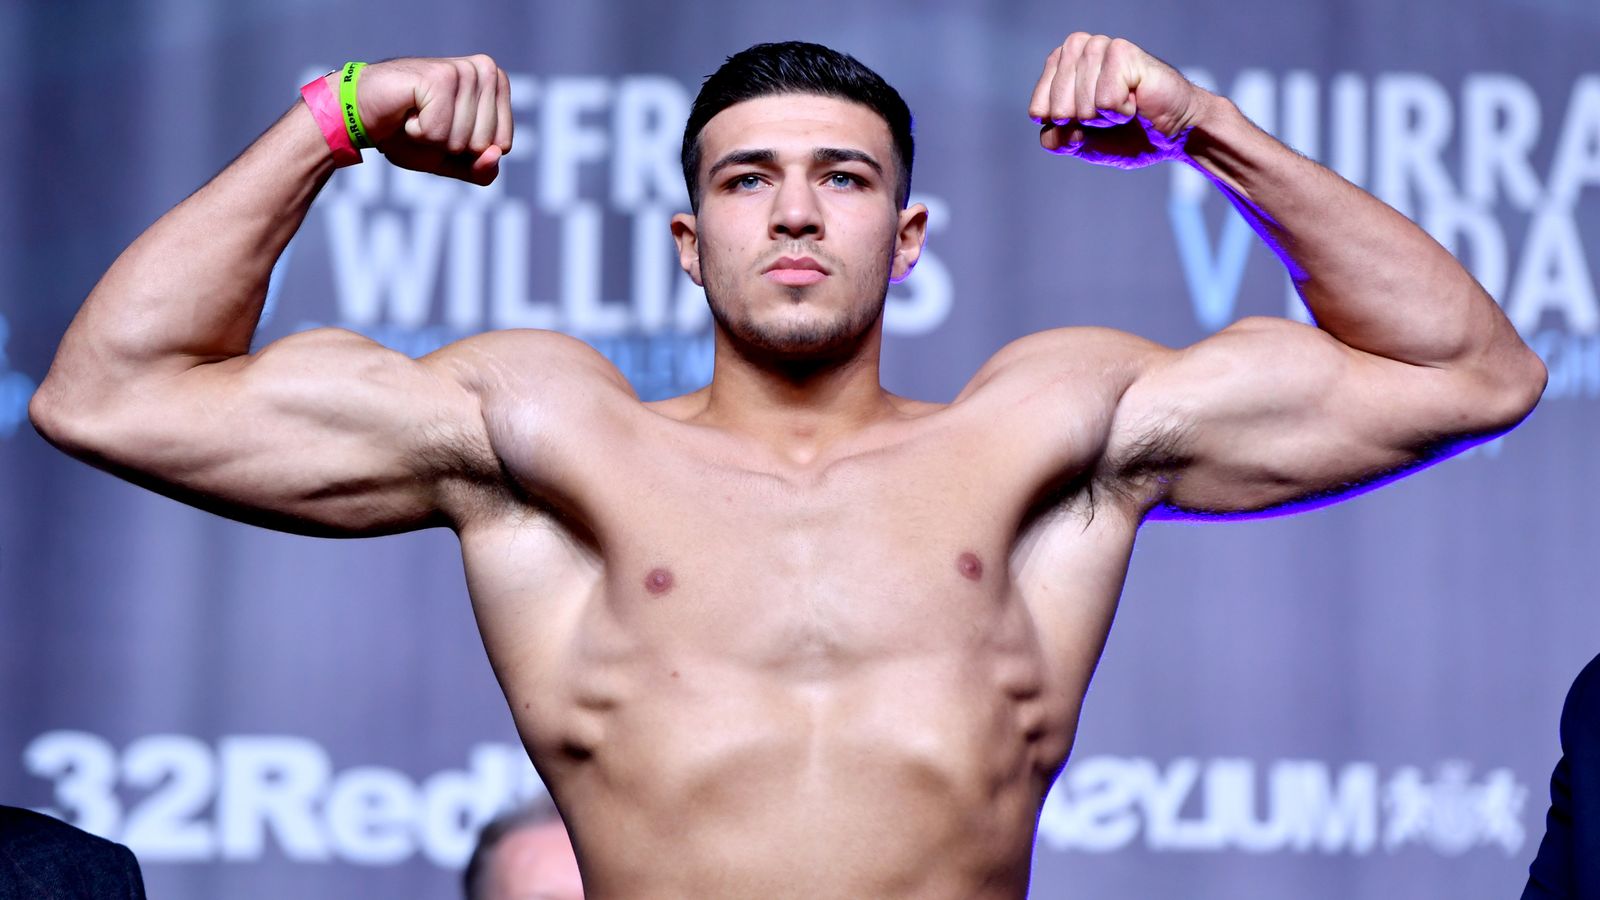 Tommy Fury and Daniel Dubois will make US debuts on Jake Pauls undercard Boxing News Sky Sports